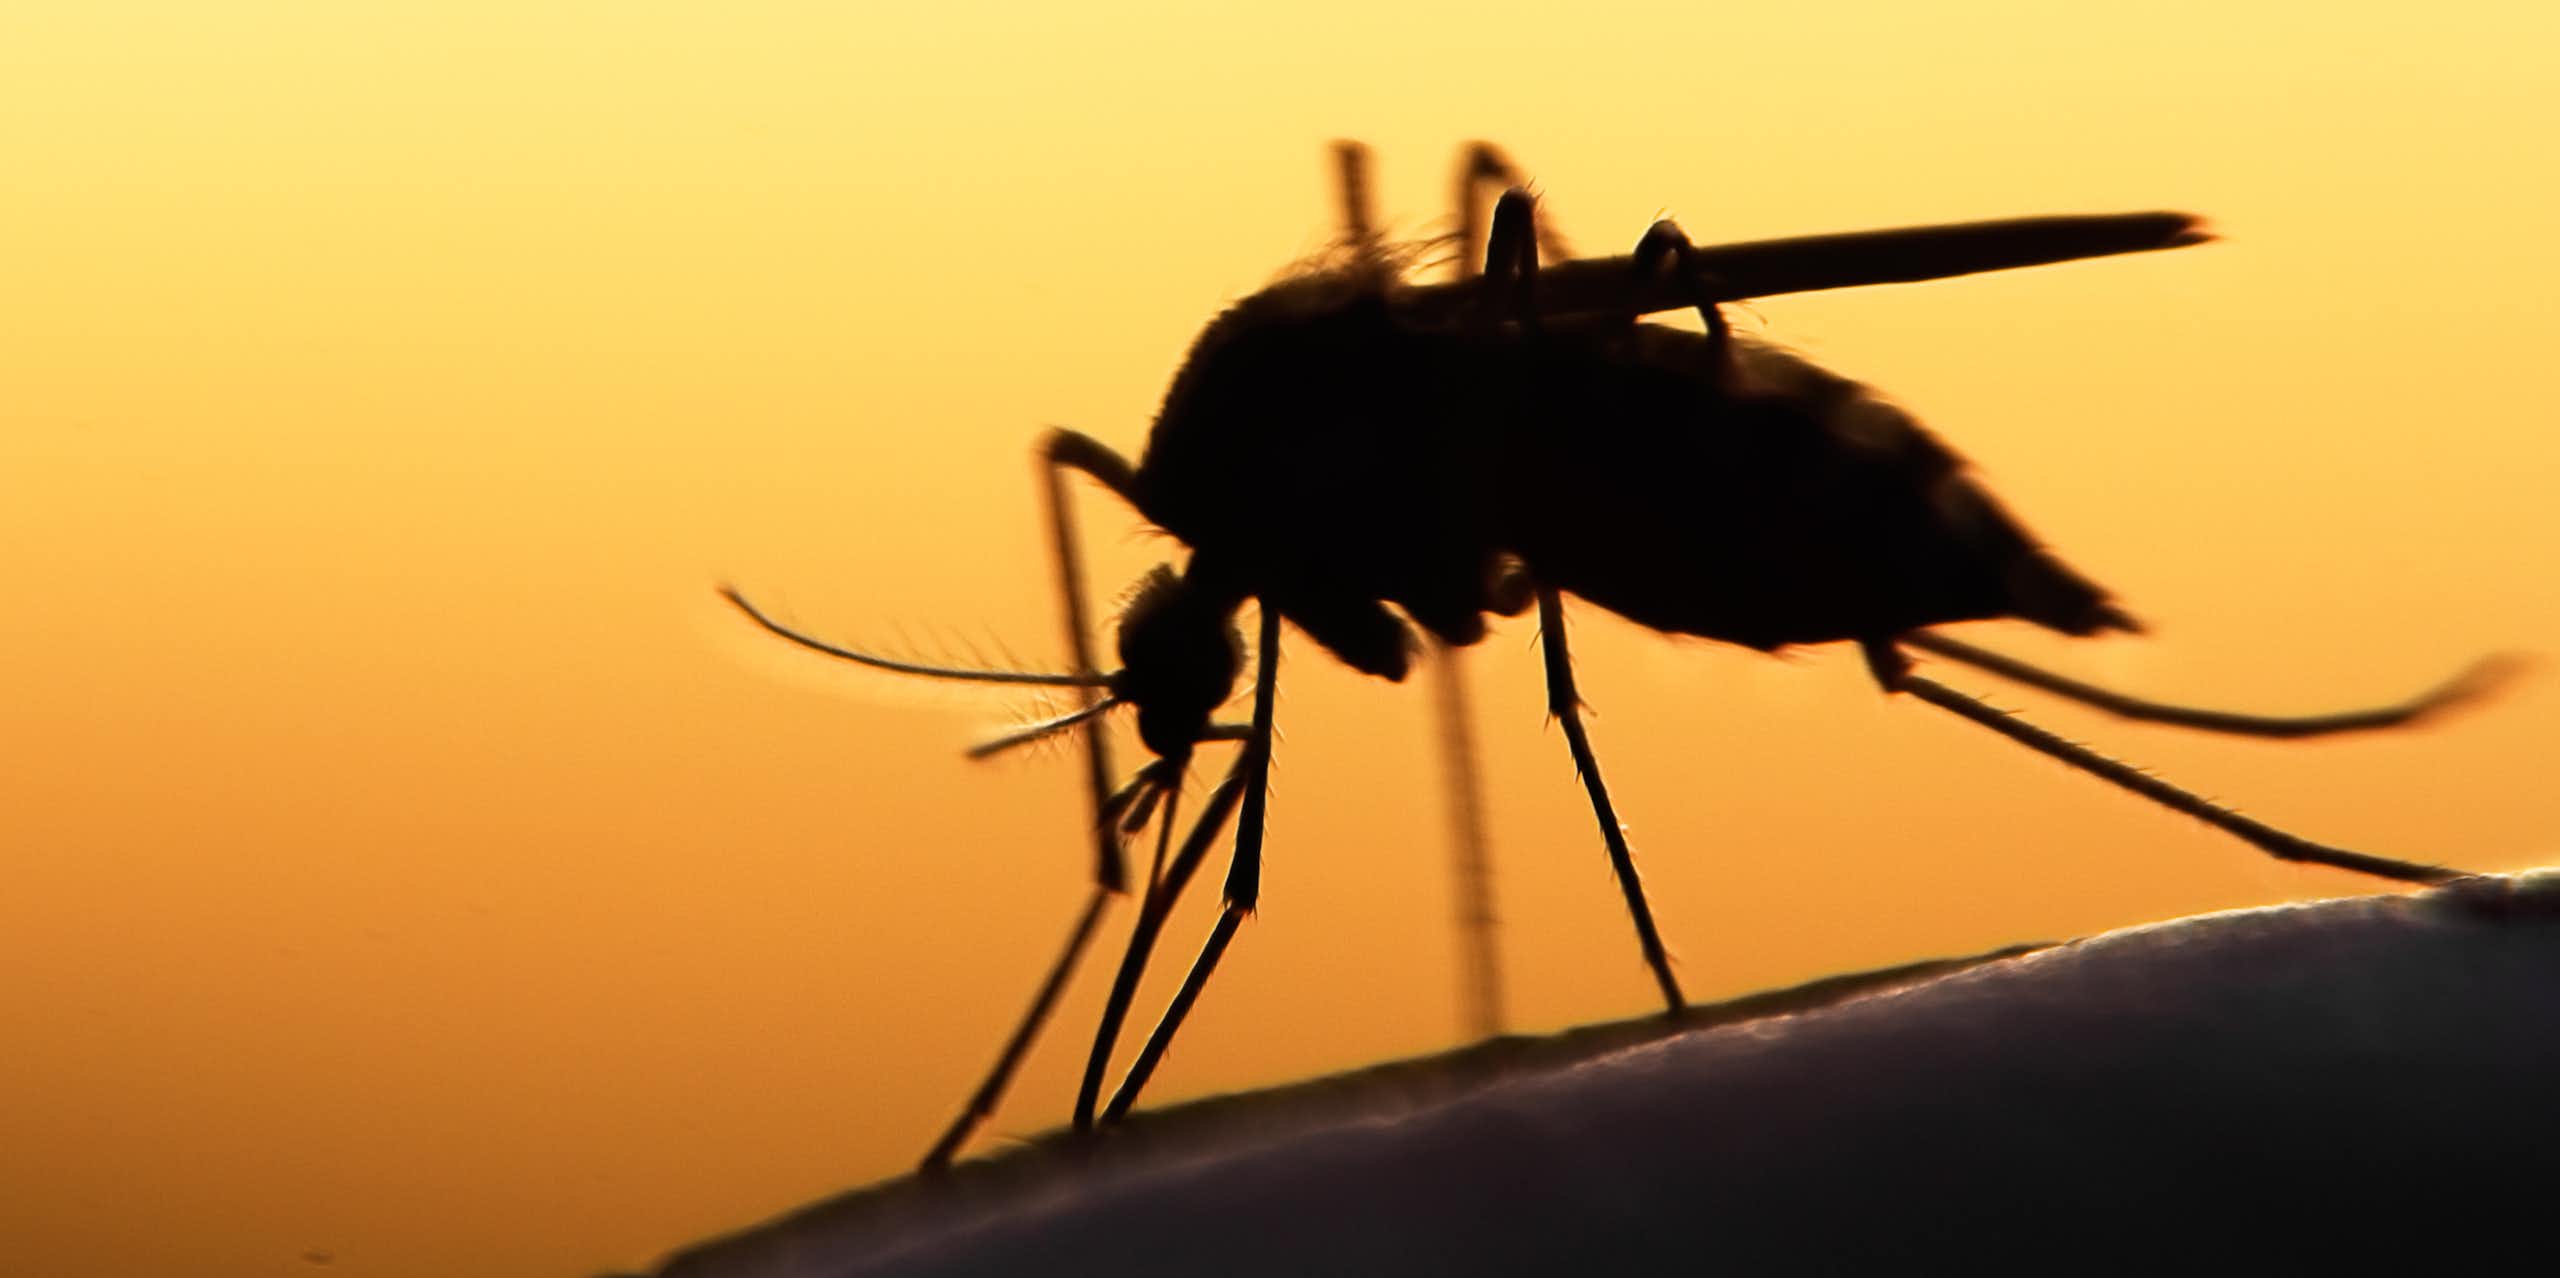 Close up shot of mosquito silhouette on human skin, orange sky in background